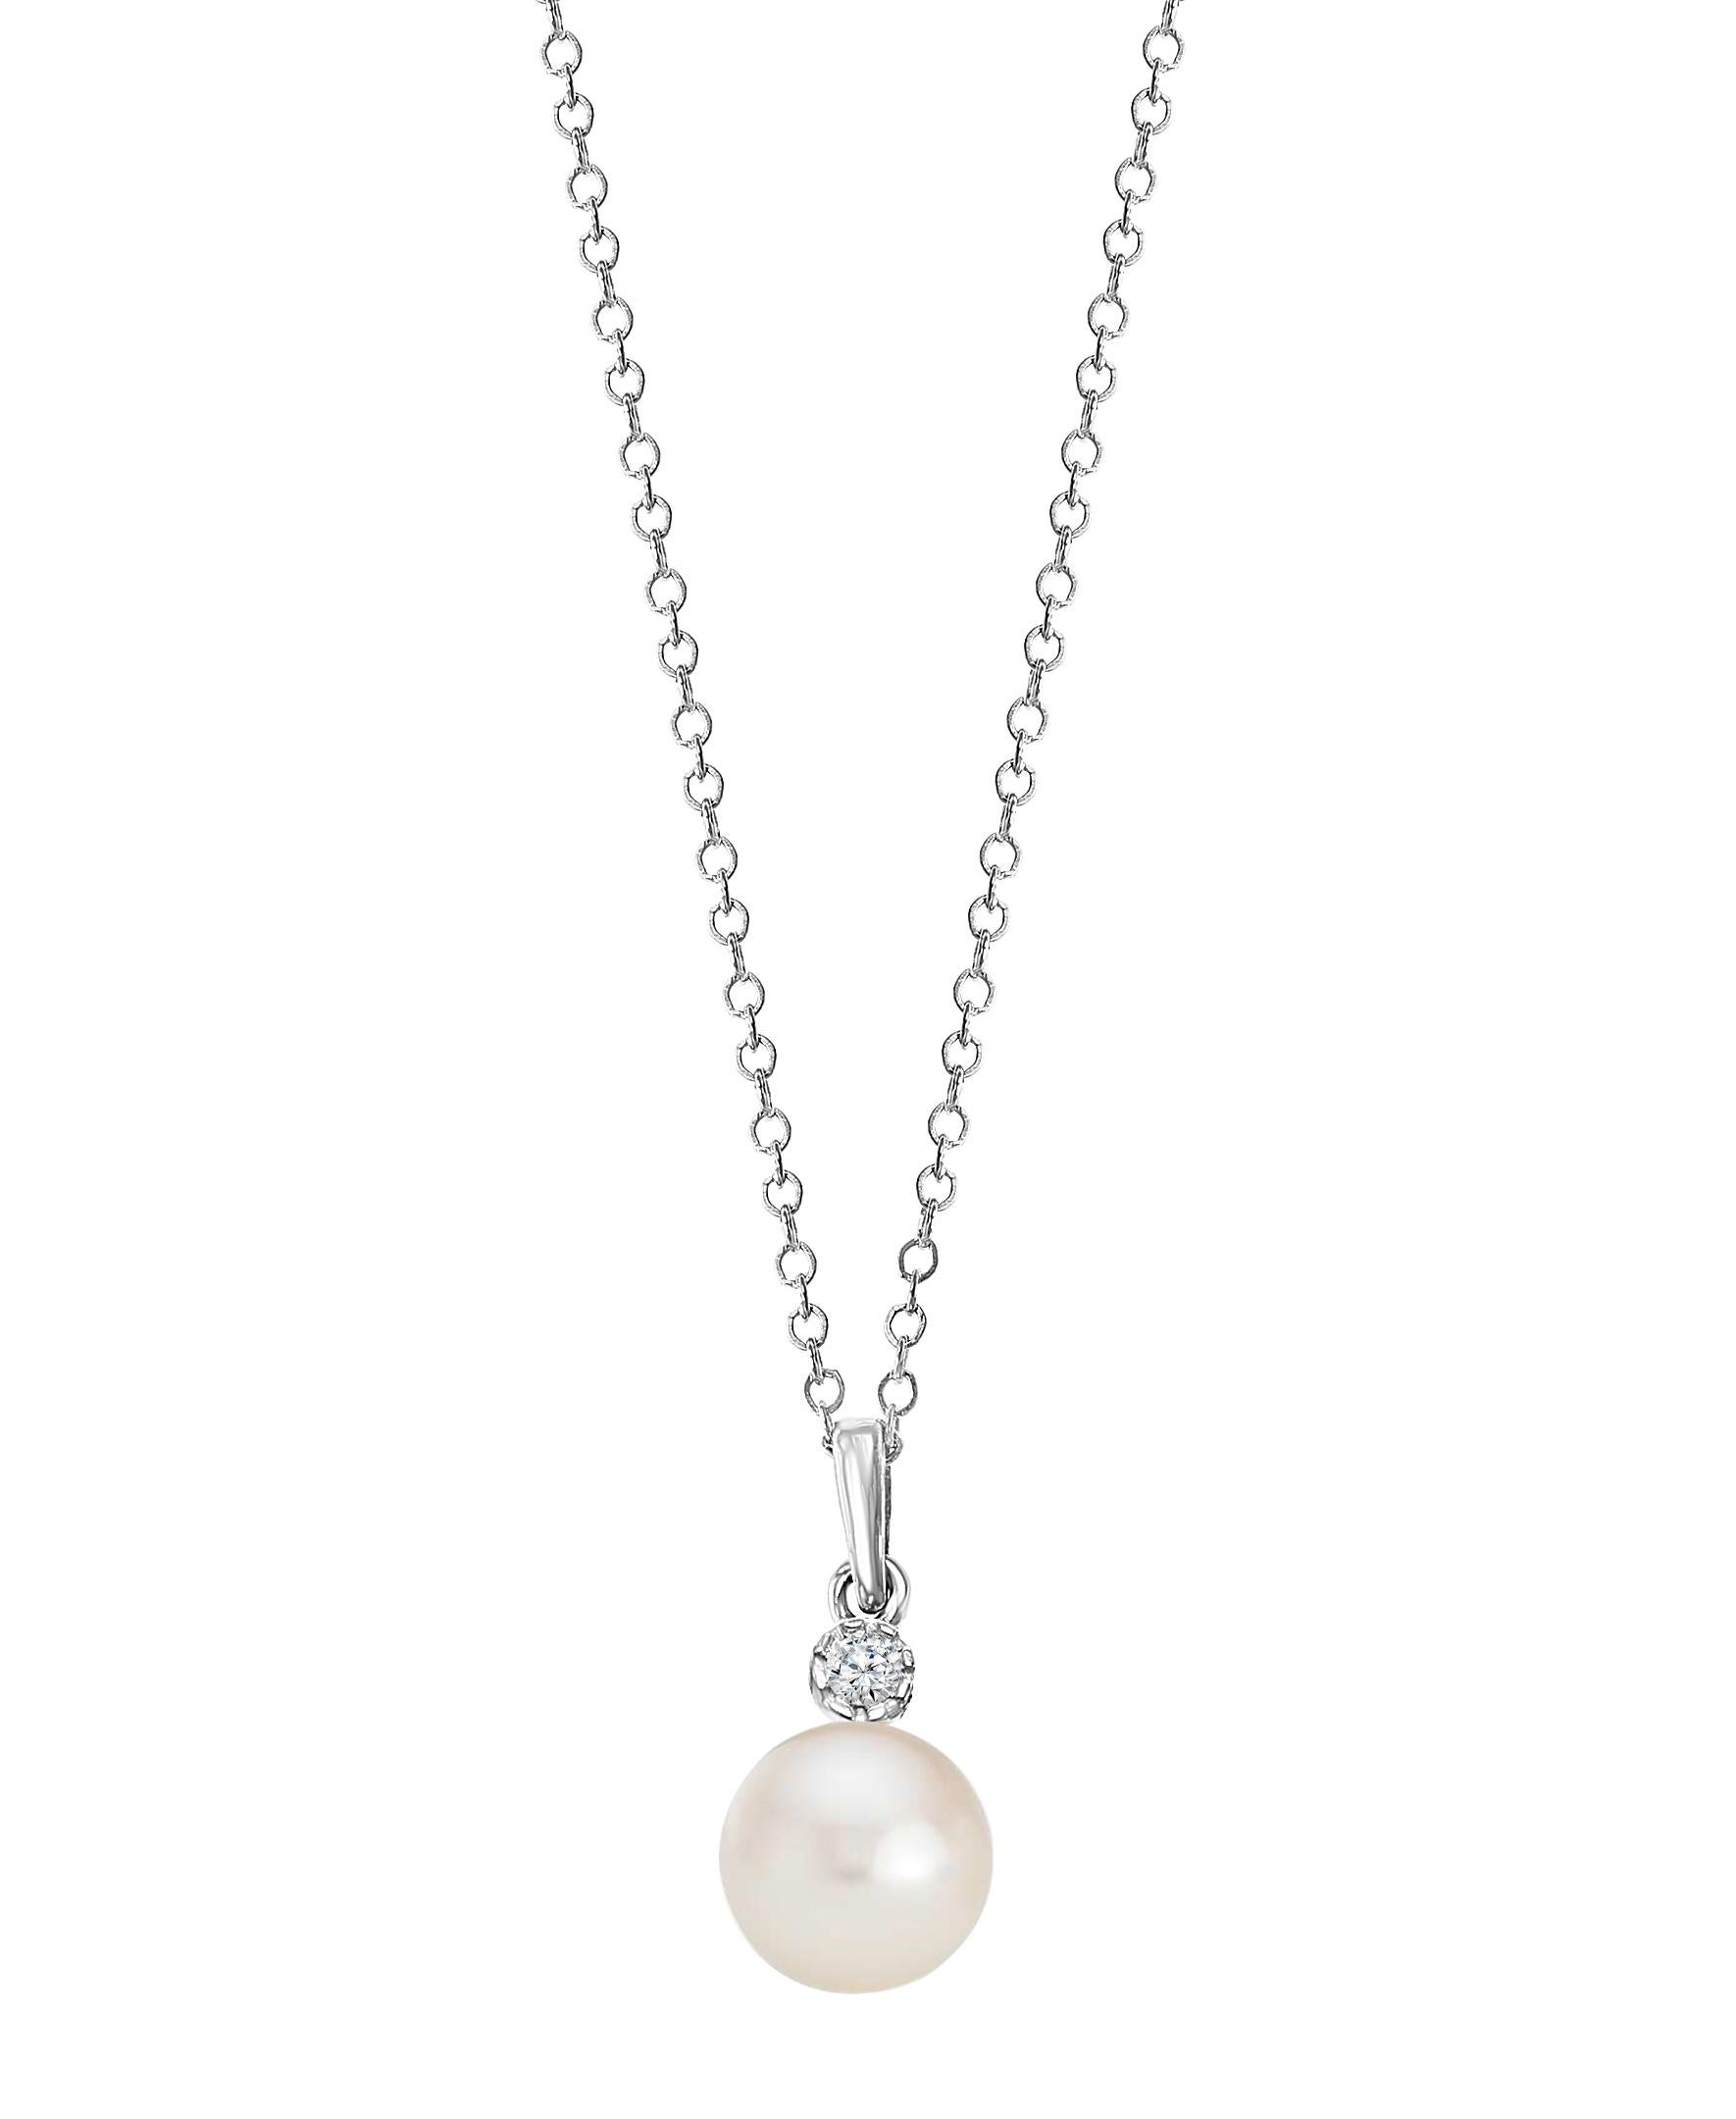 This Chinese freshwater cultured, white round pearl is set beneath a single round diamond. The pearl measures 8-8.5 and the diamond is 0.03 carats. The pendant is set on 14K white gold with an adjustable chain that has a maximum length of 18 inches.